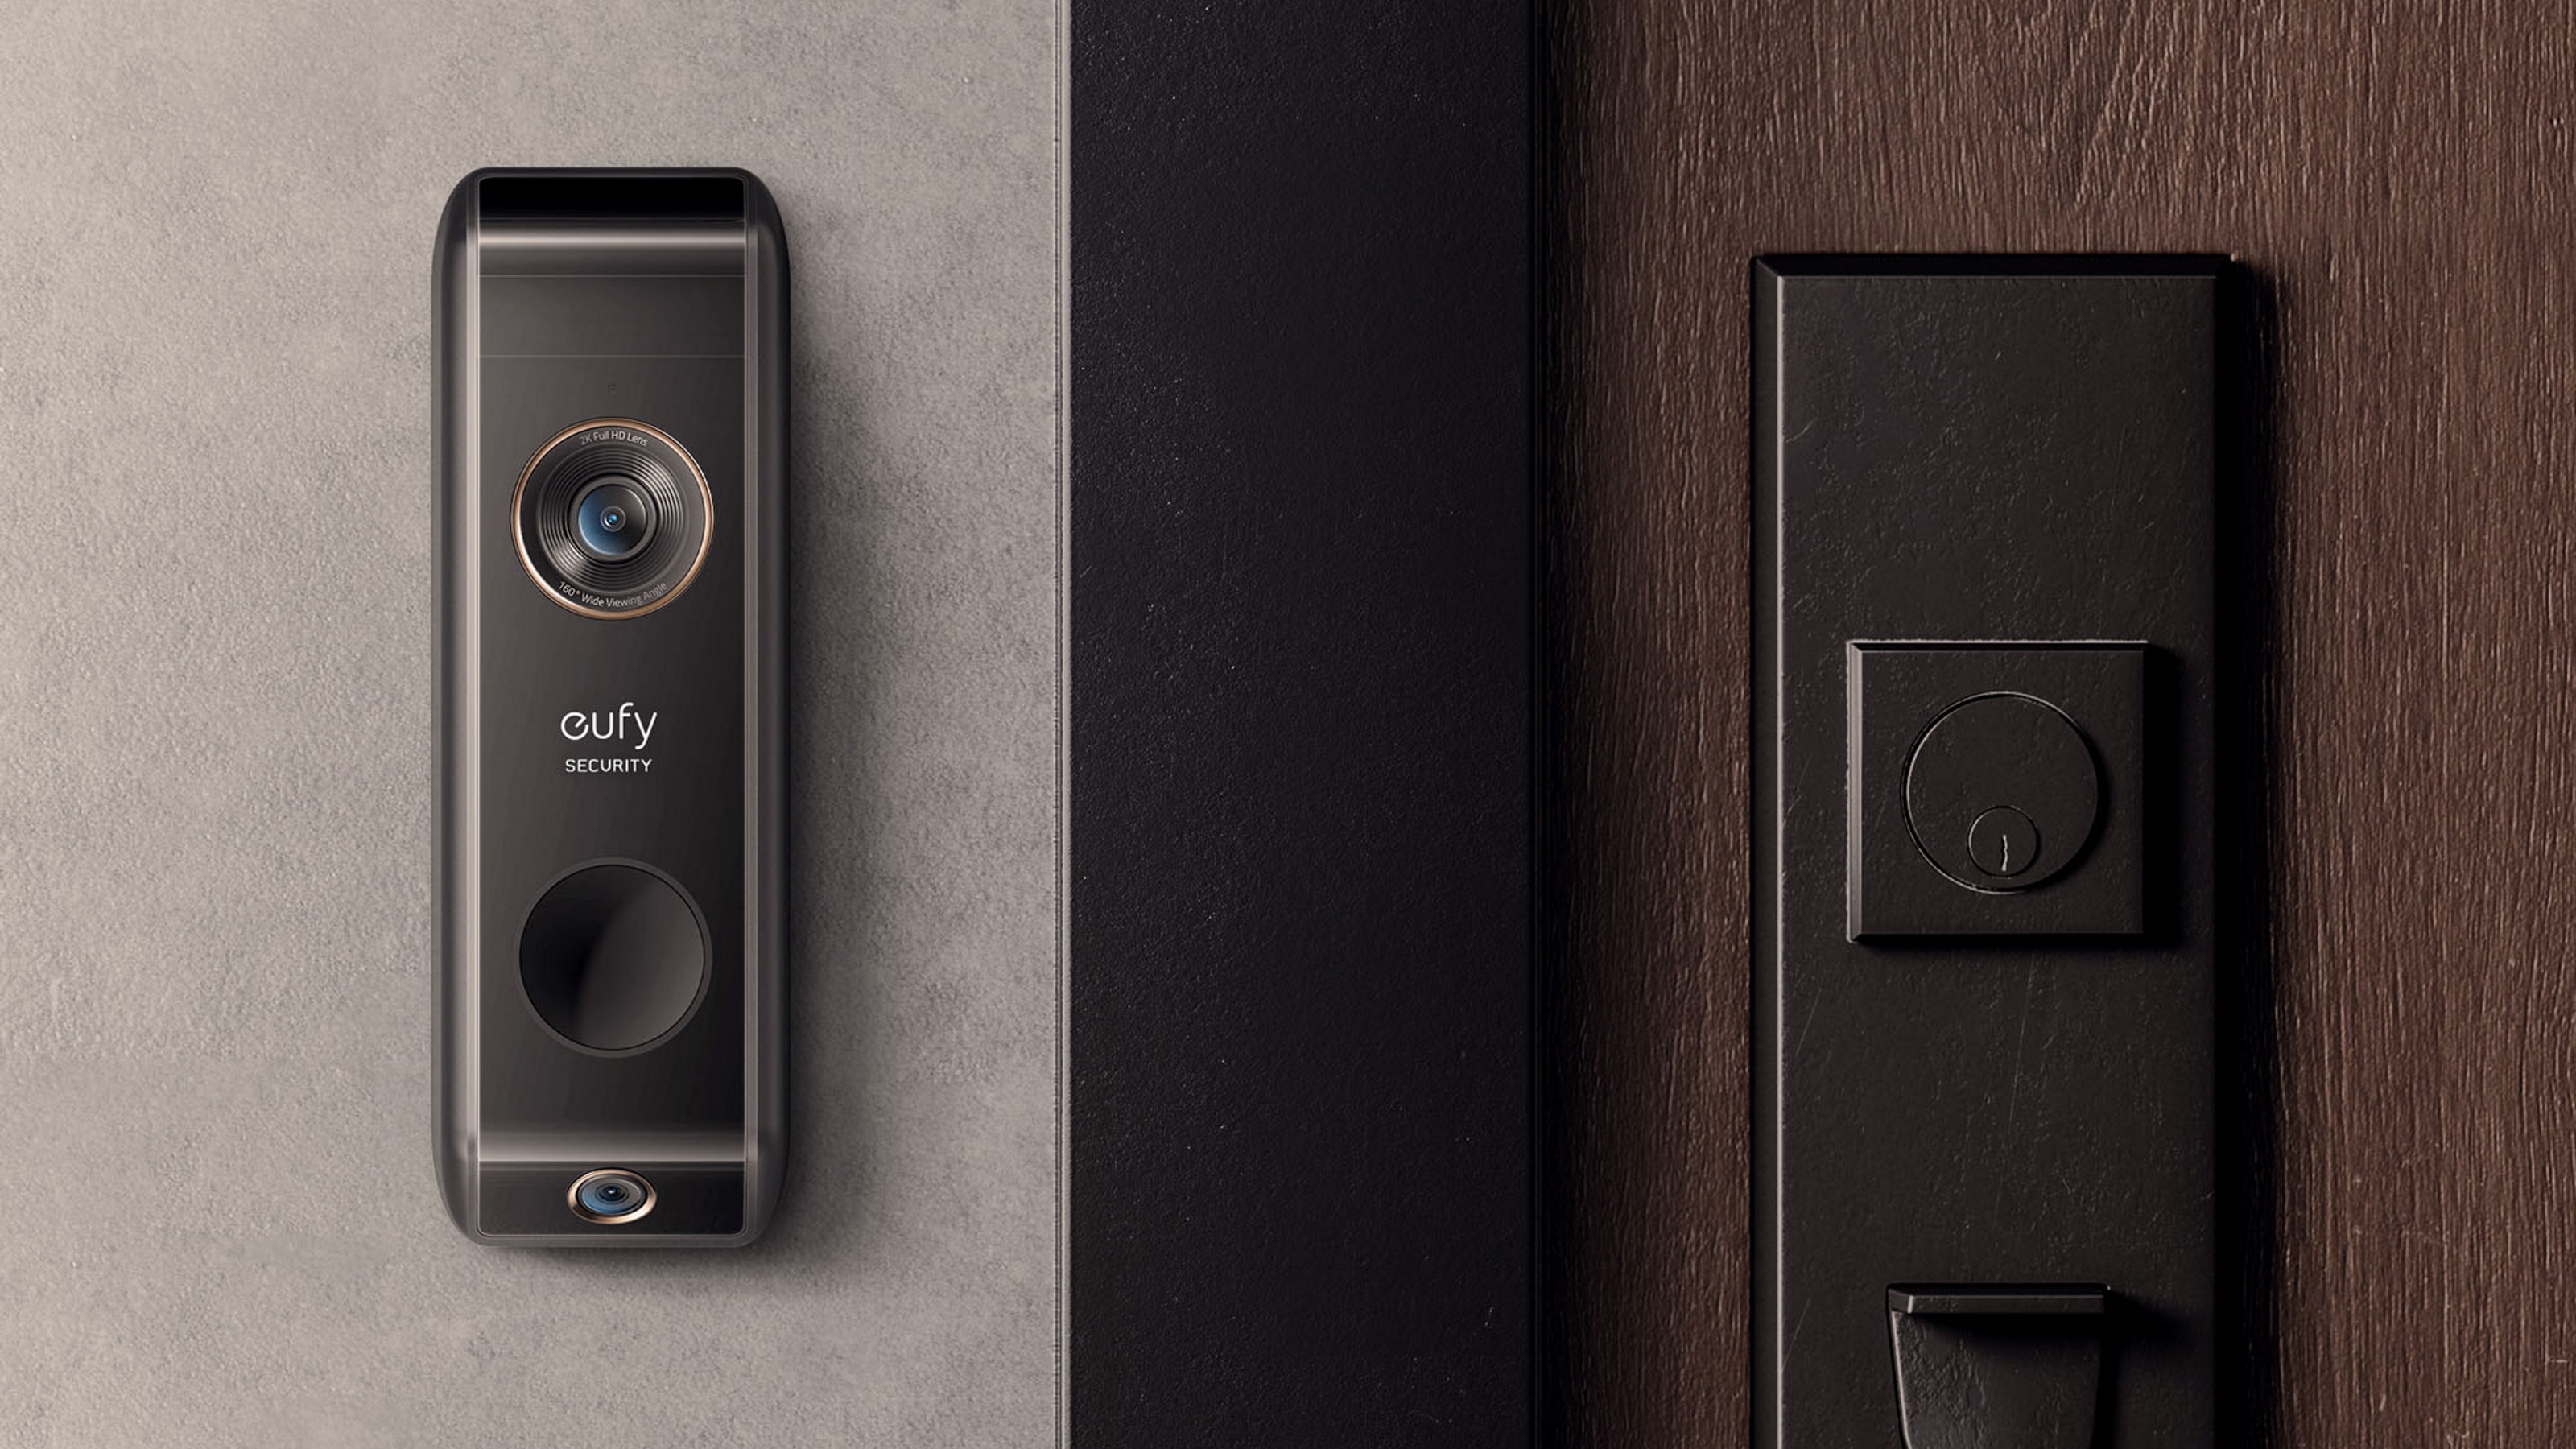 Nest Doorbell wired vs battery — what is the difference